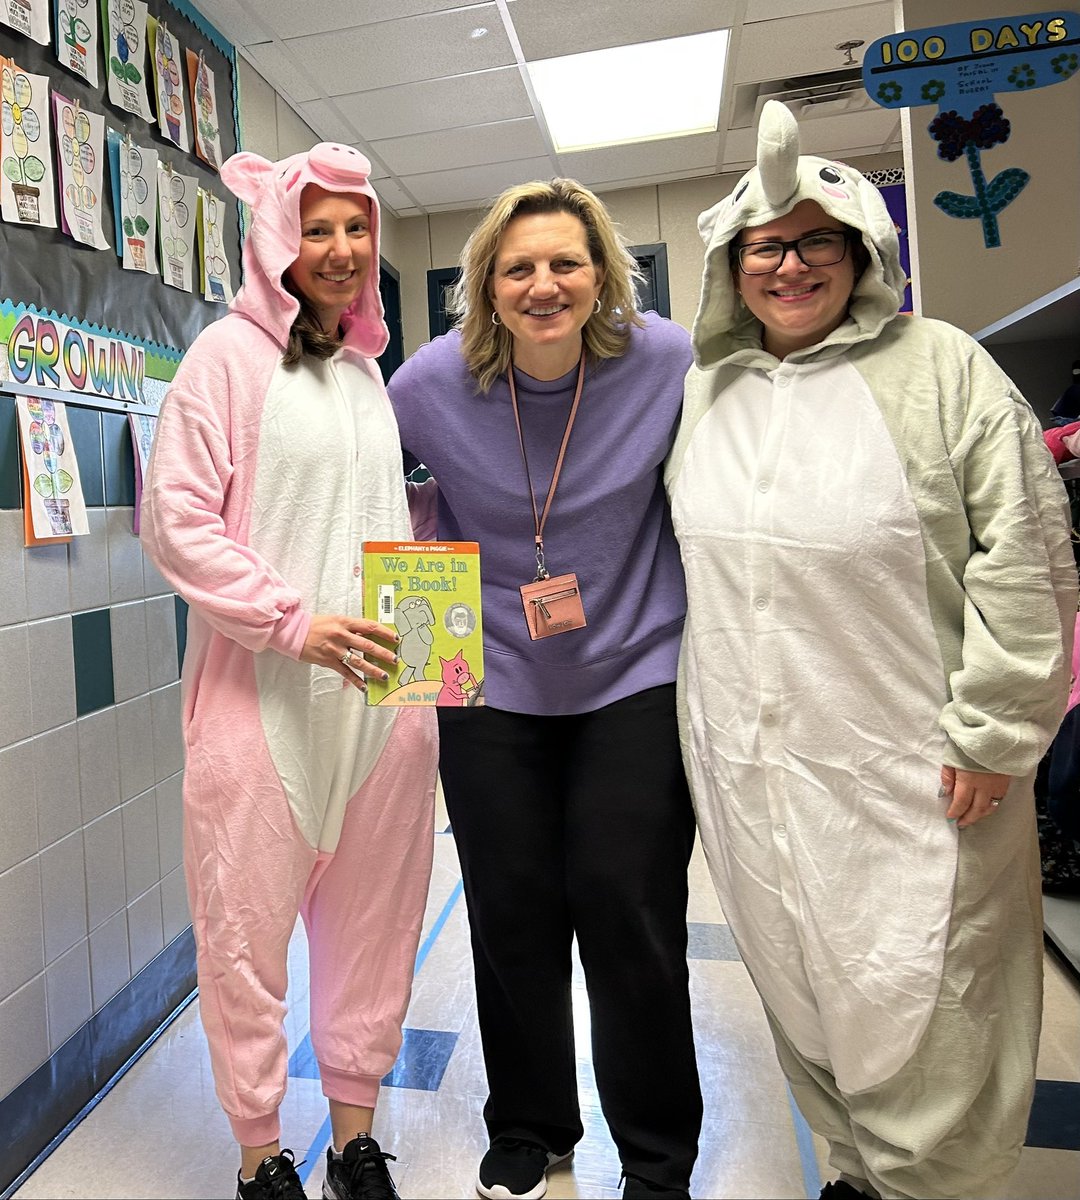 What an exciting day. I got to meet Elephant and Piggie! #TESleads @mrswilliamstes @MoWillems #ReadAcrossAmericaWeek